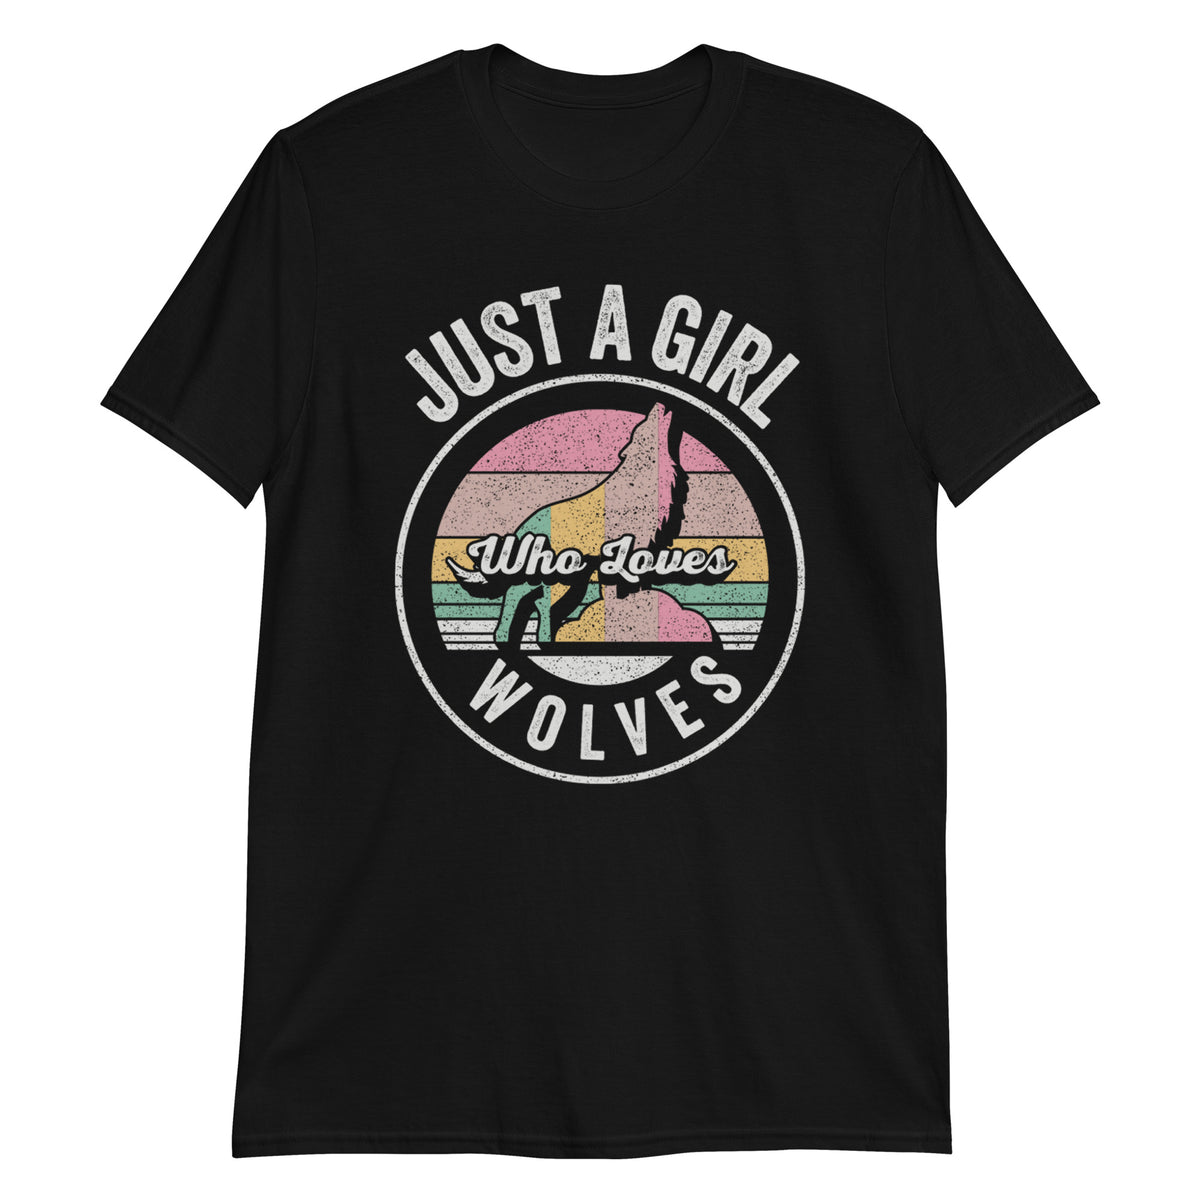 Just A Girl Who Loves Wolves Funny Vintage Retro Unisex T-Shirt